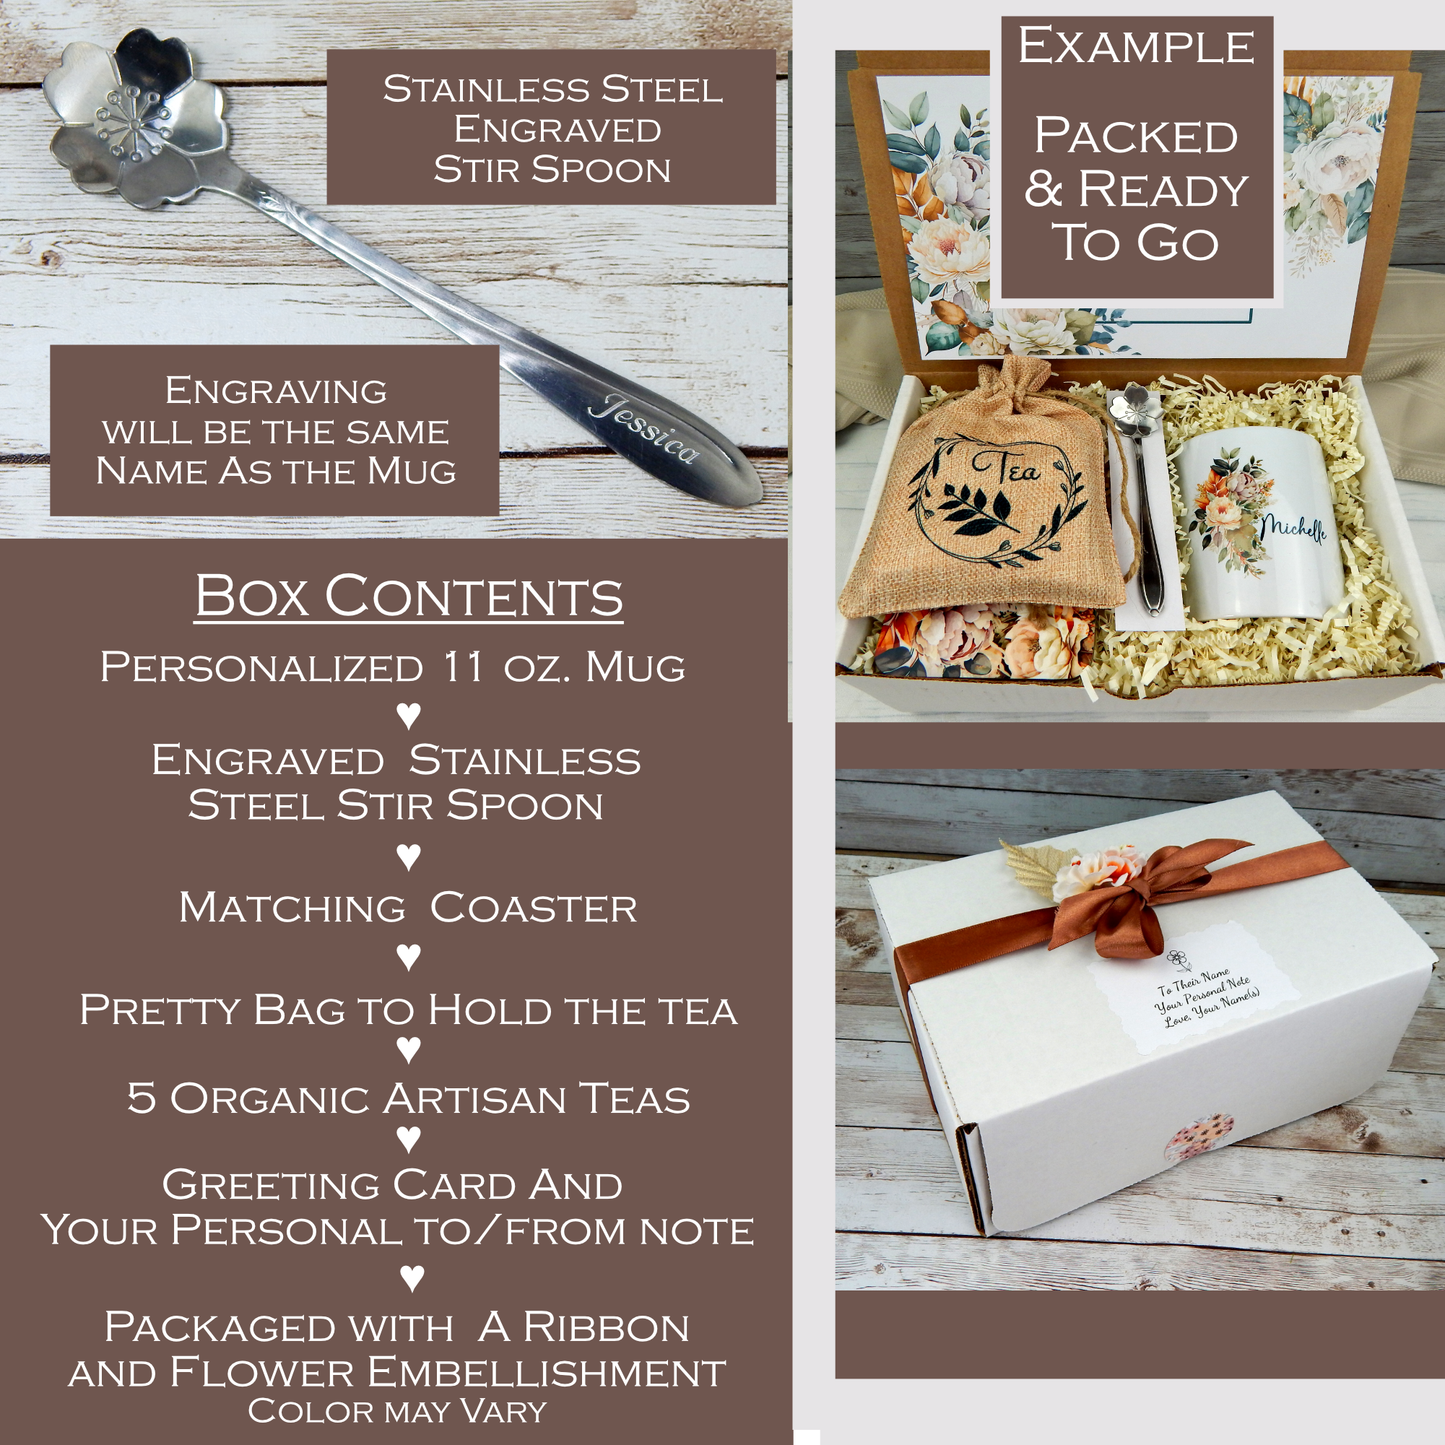 Thank You Gift for Tea Lover - Appreciation Gift with Assorted Tea